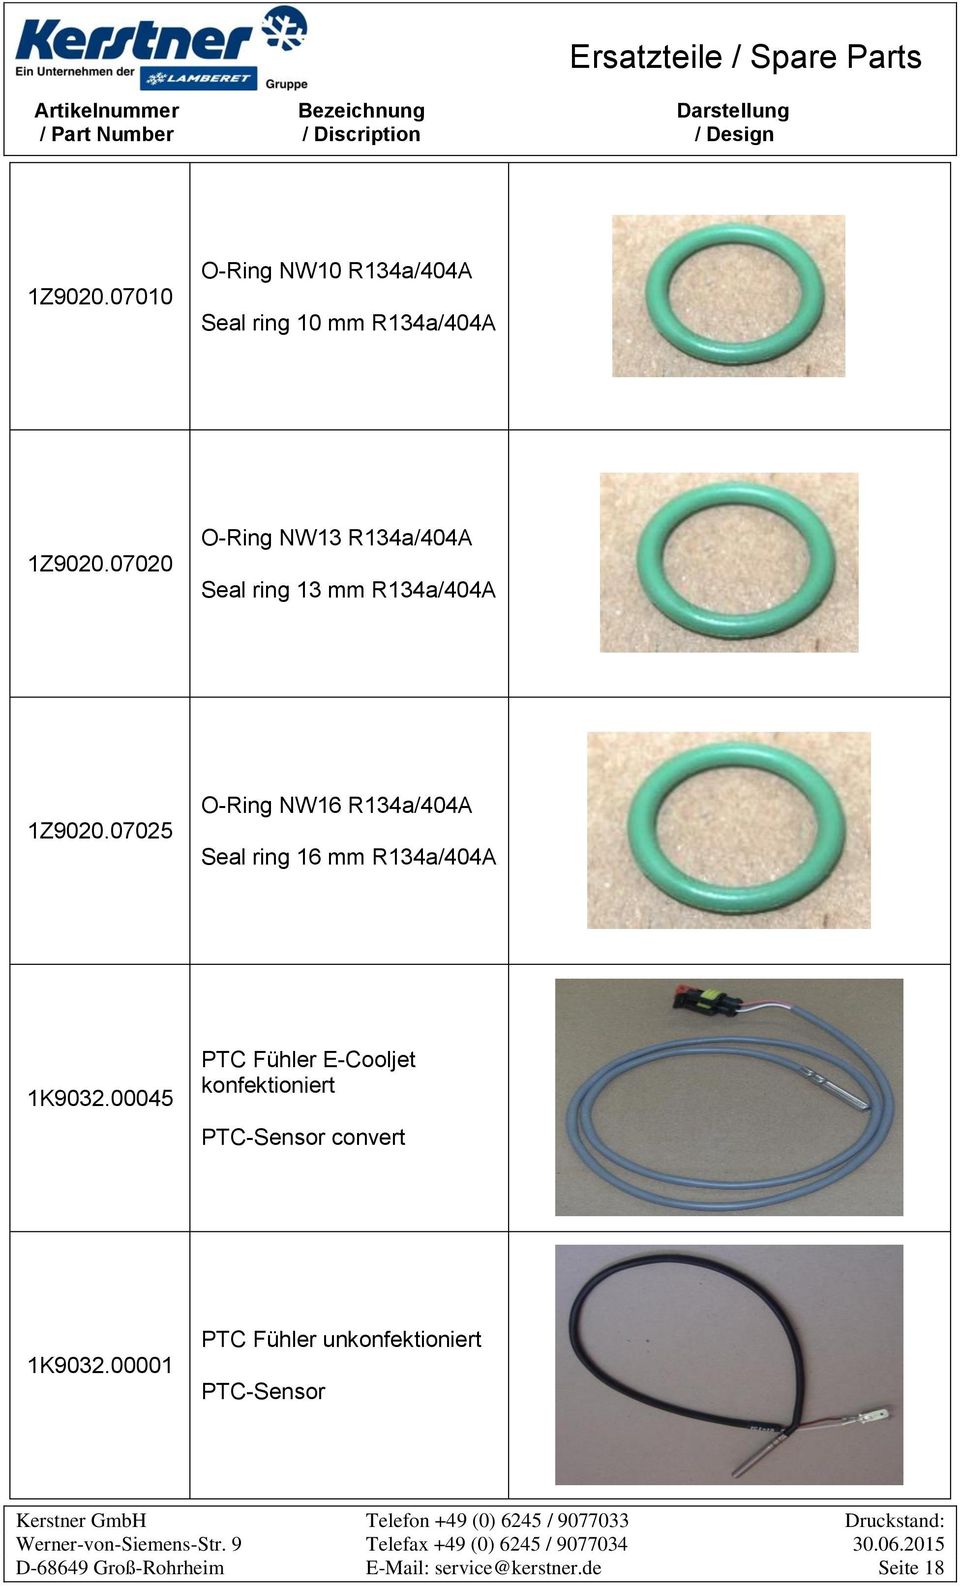 07025 O-Ring NW16 R134a/404A Seal ring 16 mm R134a/404A 1K9032.